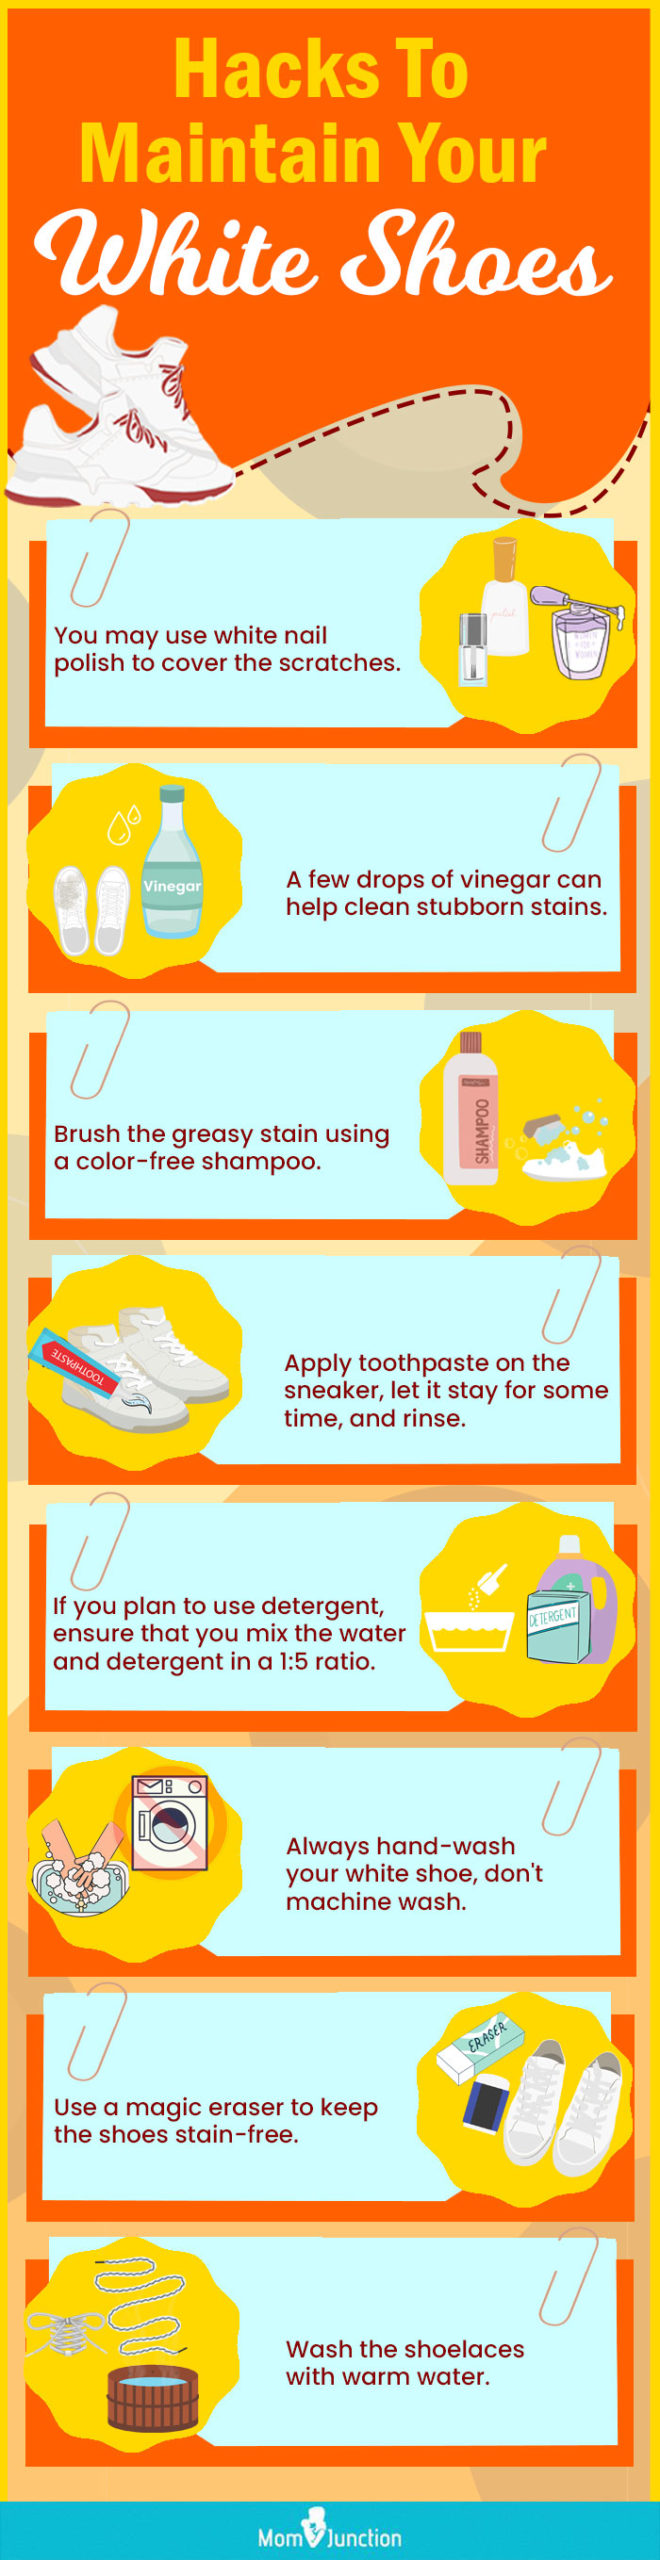 Hacks To Maintain Your White Shoes (infographic)